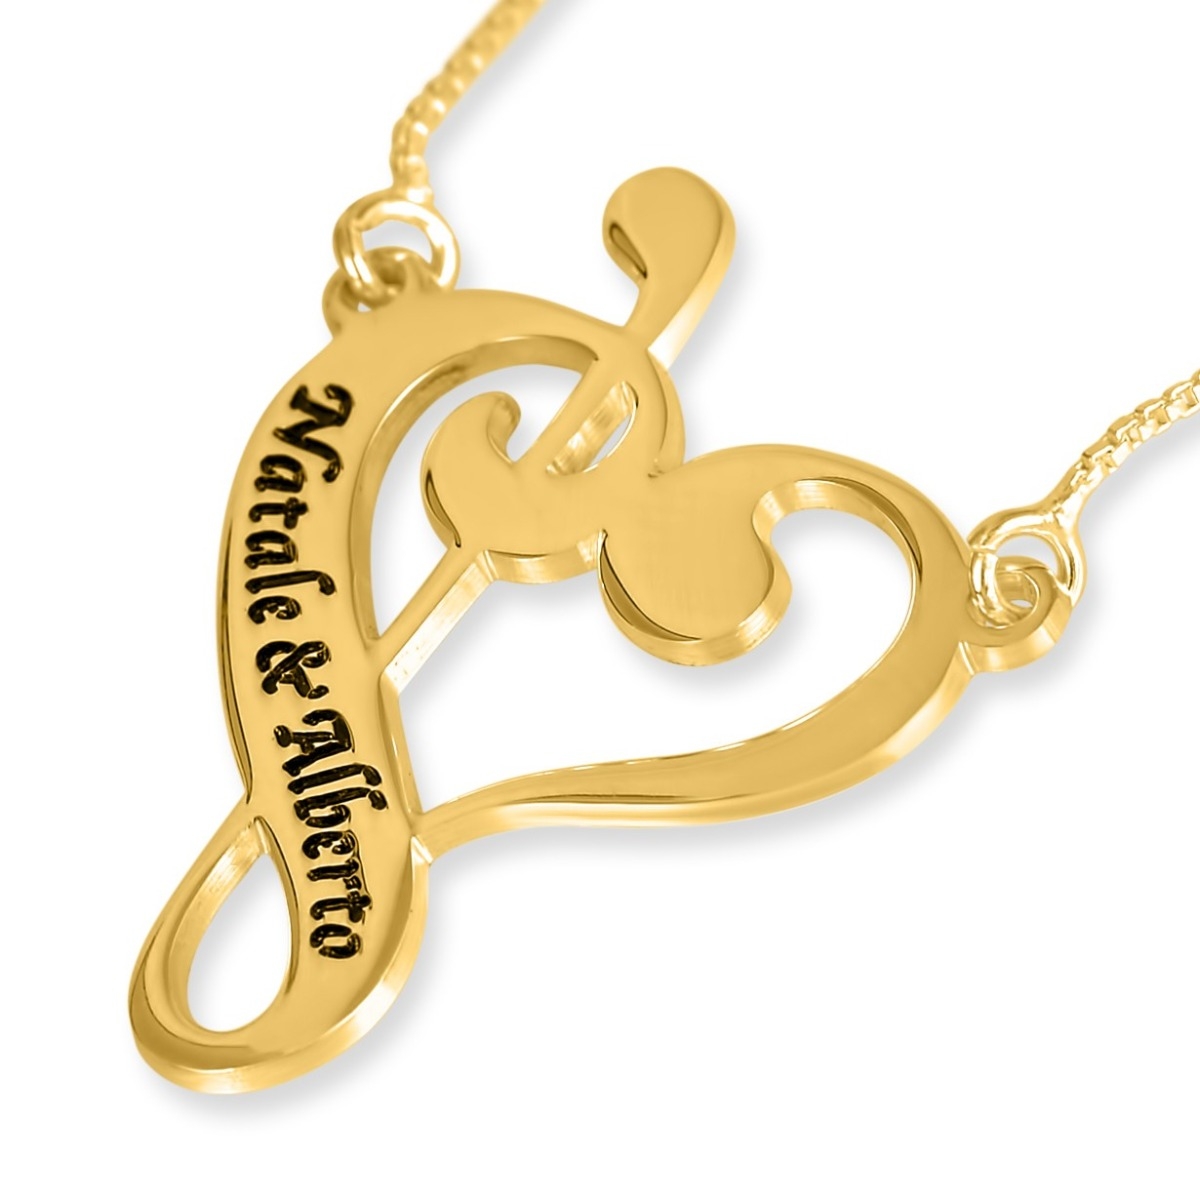 Gold Plated Musical Notes Love Heart Name Necklace - Up to 2 Names in English or Hebrew - 1